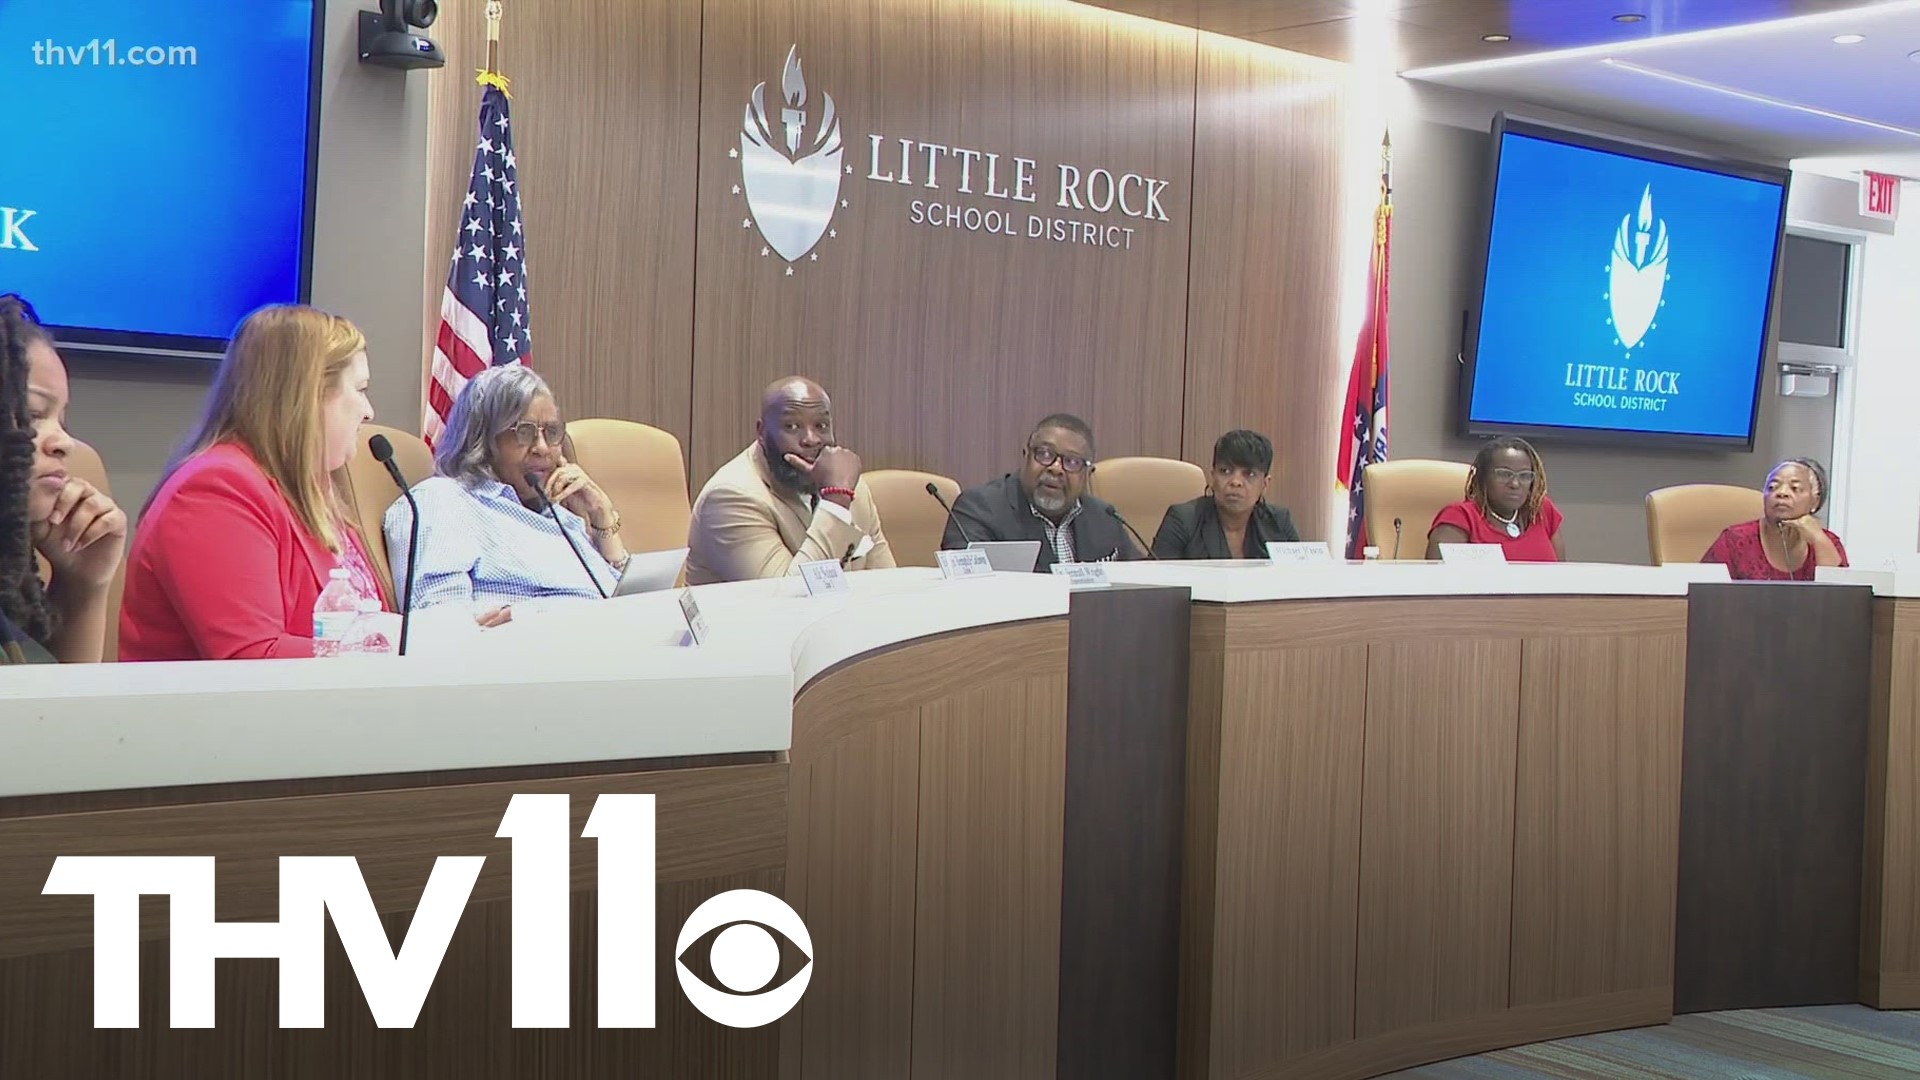 Changes are making their way to the classroom, as board members of the Little Rock School District met on Thursday night to start the process of implementing LEARNS.